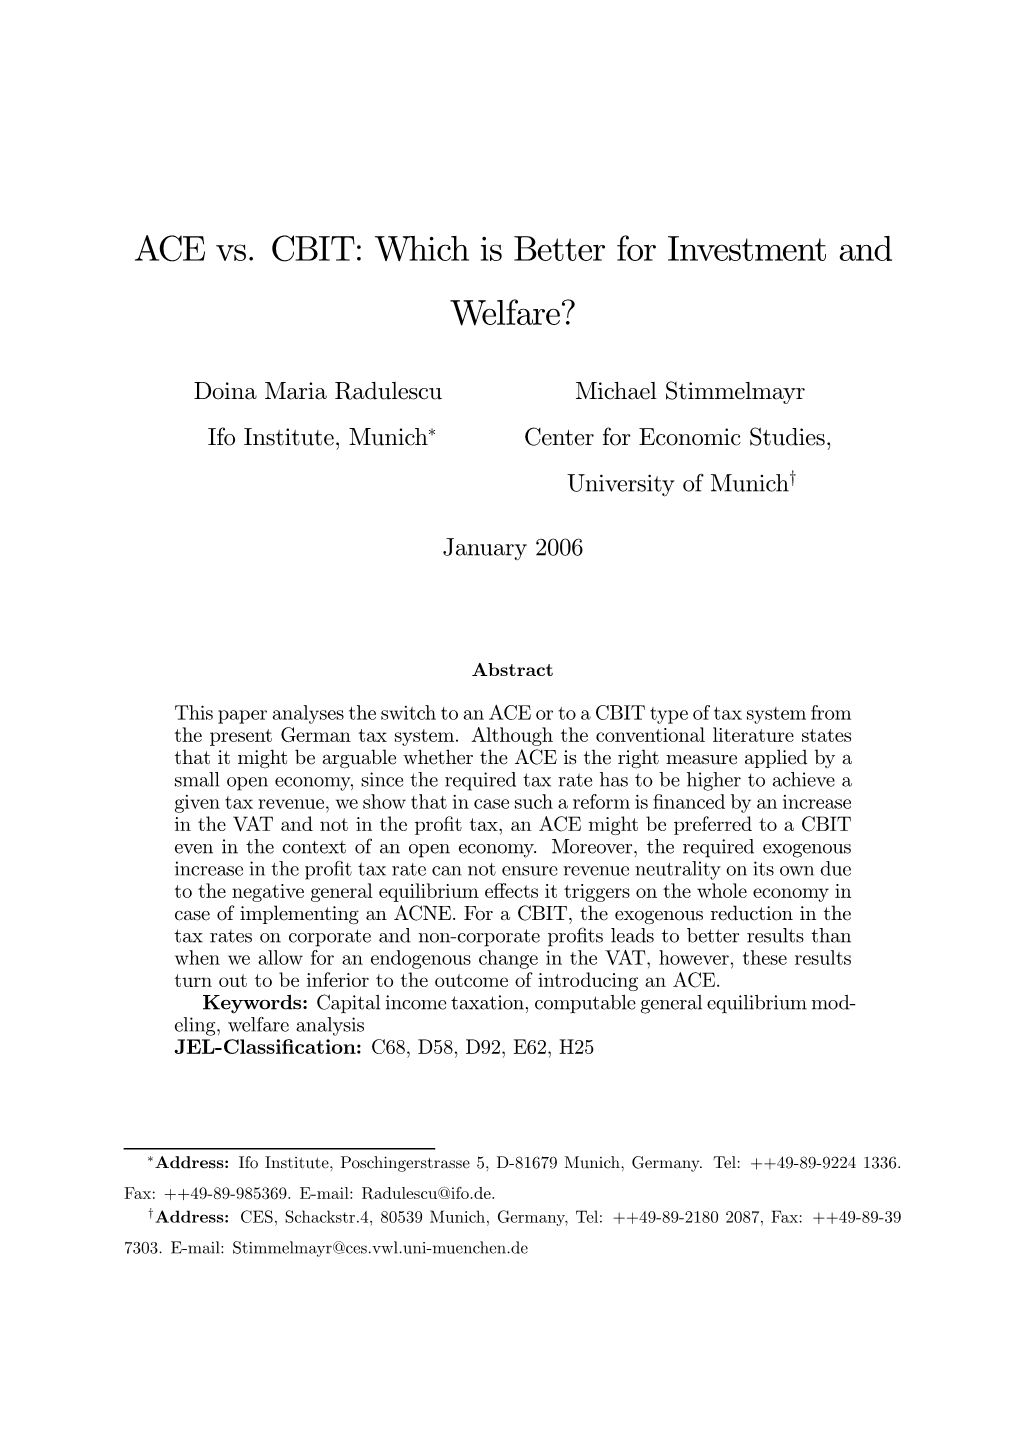 ACE Vs. CBIT: Which Is Better for Investment and Welfare?